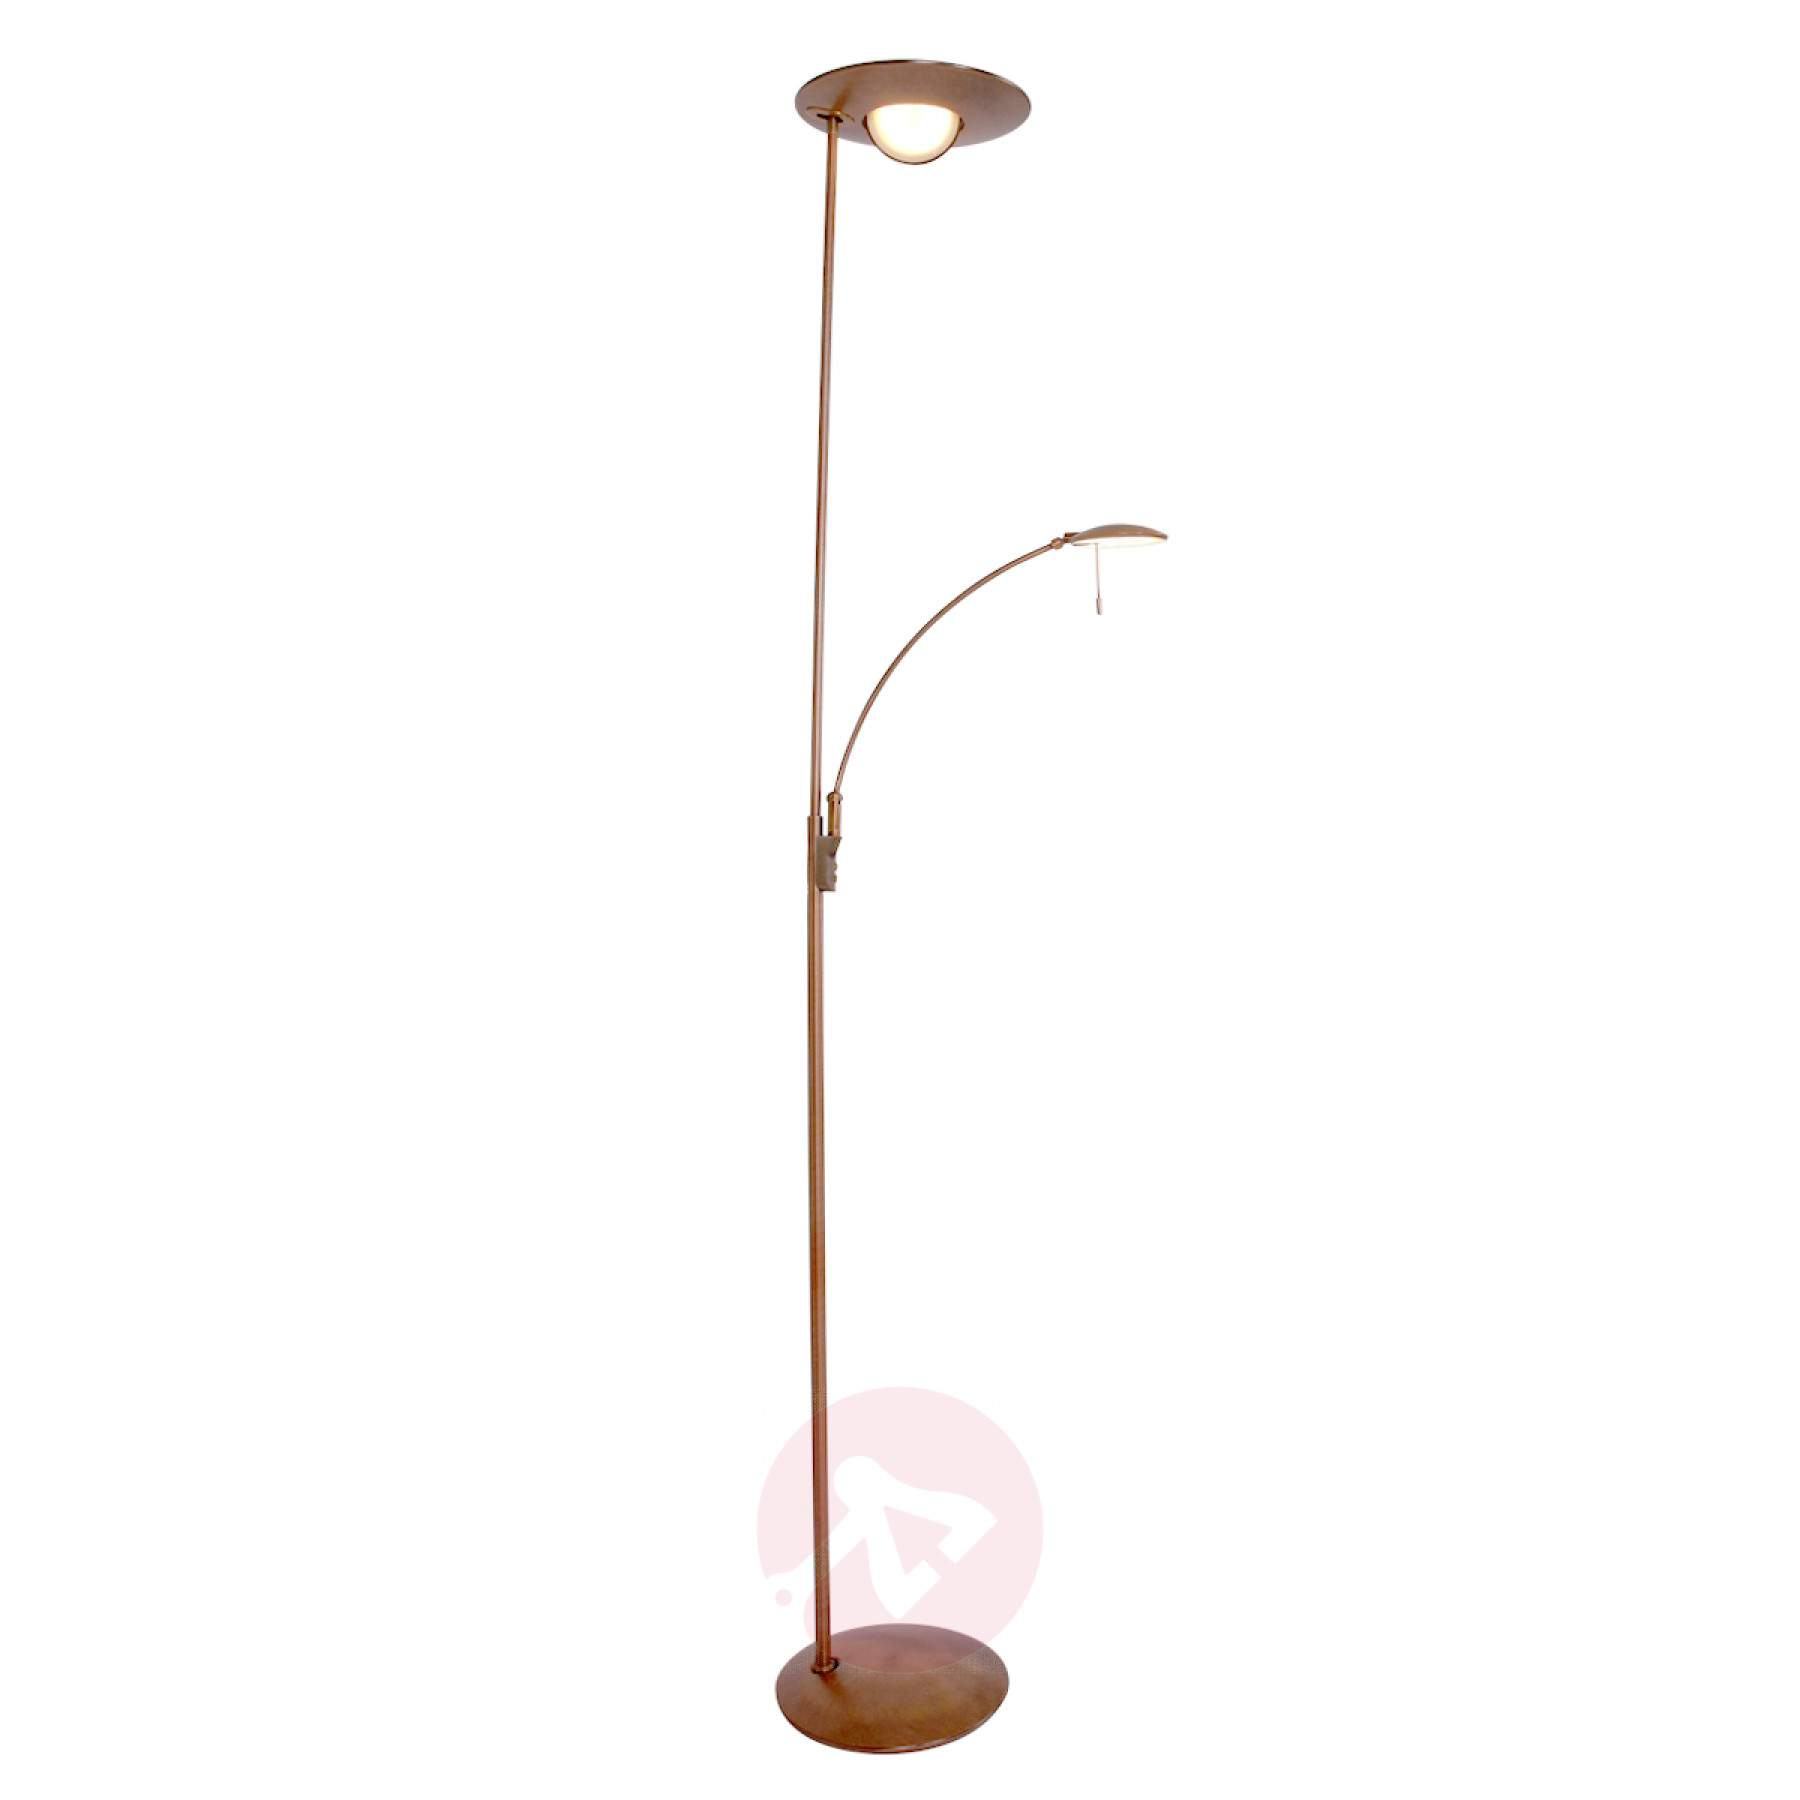 Bronze Coloured Led Floor Lamp Zenith With Dimmer regarding sizing 1800 X 1800